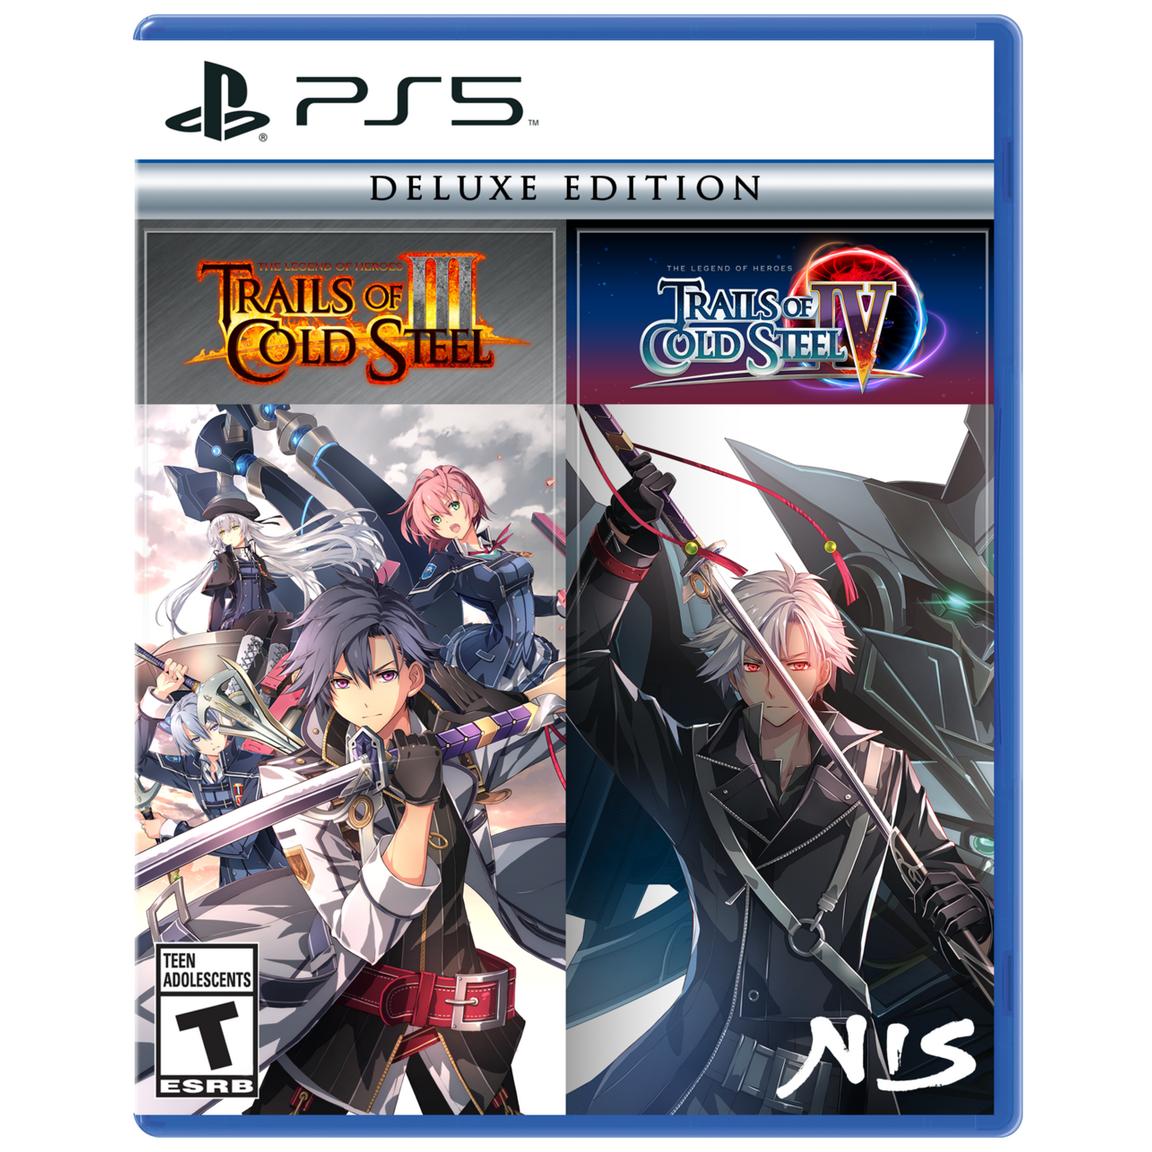 Видеоигра The Legend of Heroes: Trails of Cold Steel III / The Legend of Heroes: Trails of Cold Steel IV - Deluxe Edition - PlayStation 5 игра nintendo the legend of heroes trails of cold steel iii ee